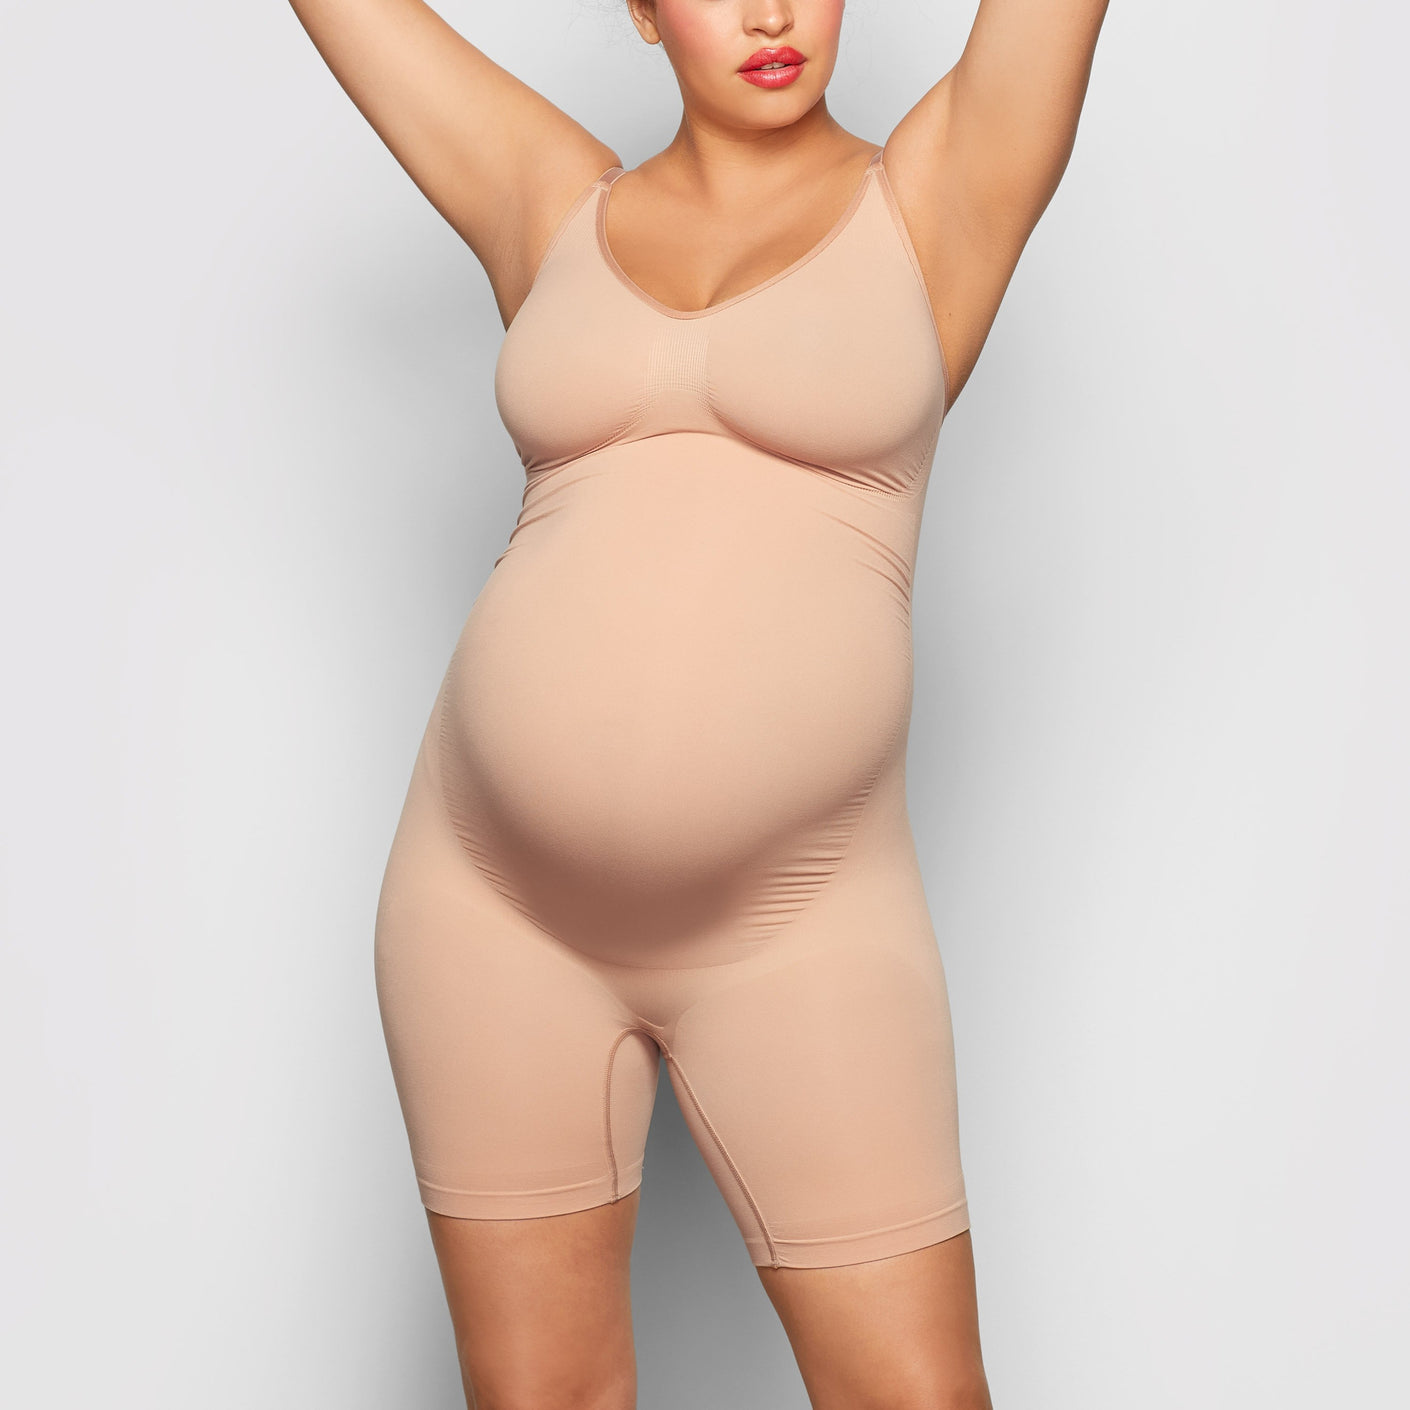 The @SKIMS maternity shapewear is the real winner here. By the